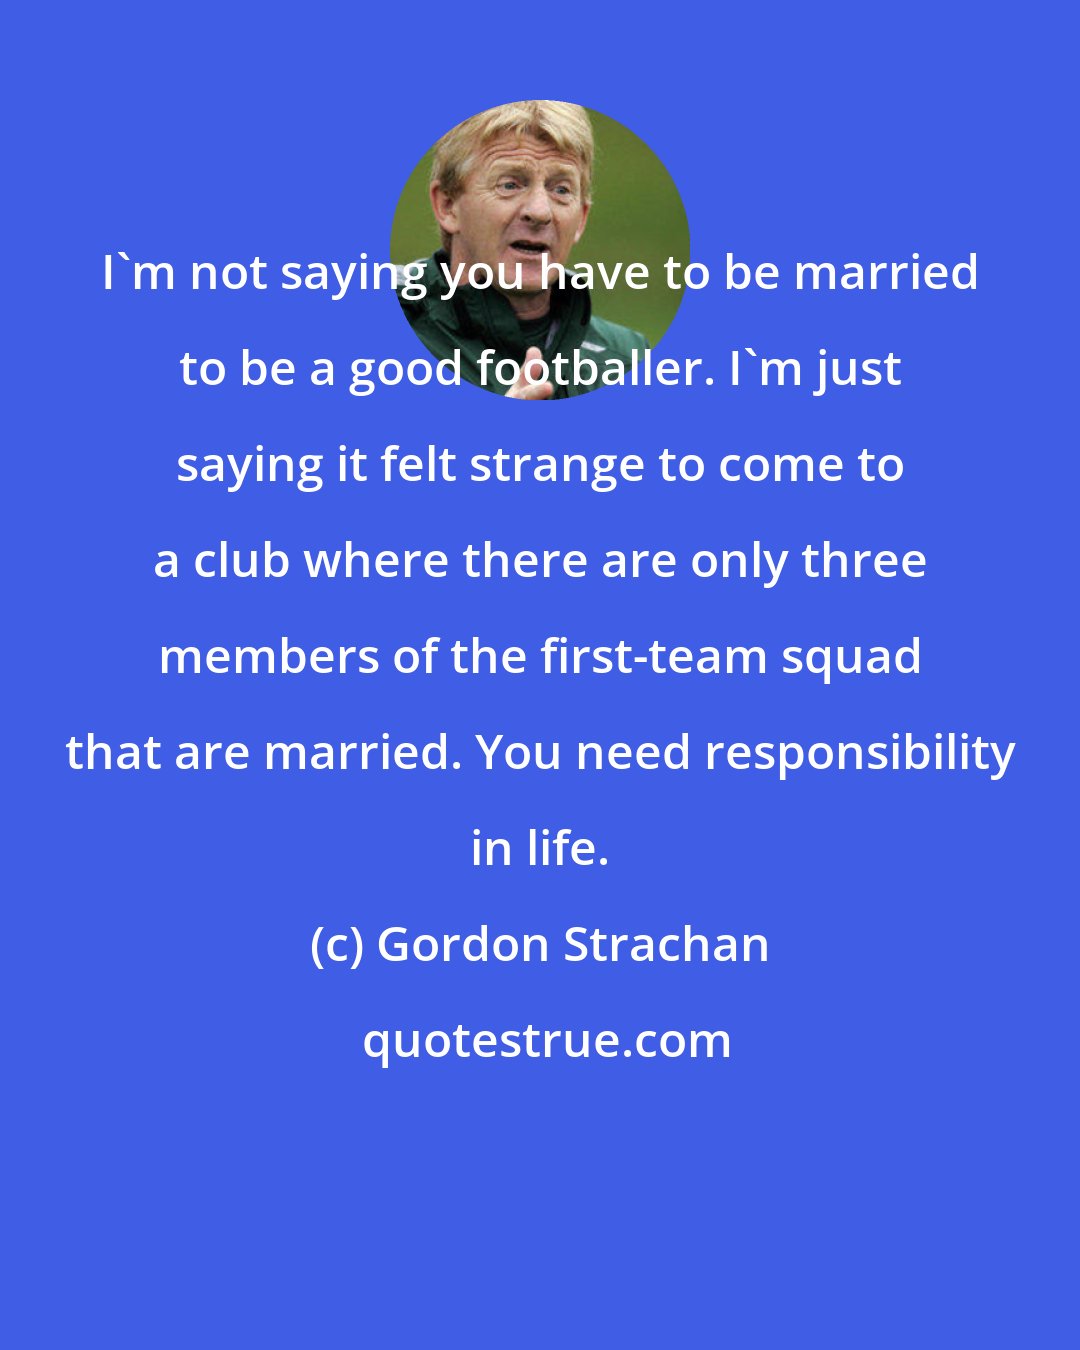 Gordon Strachan: I'm not saying you have to be married to be a good footballer. I'm just saying it felt strange to come to a club where there are only three members of the first-team squad that are married. You need responsibility in life.